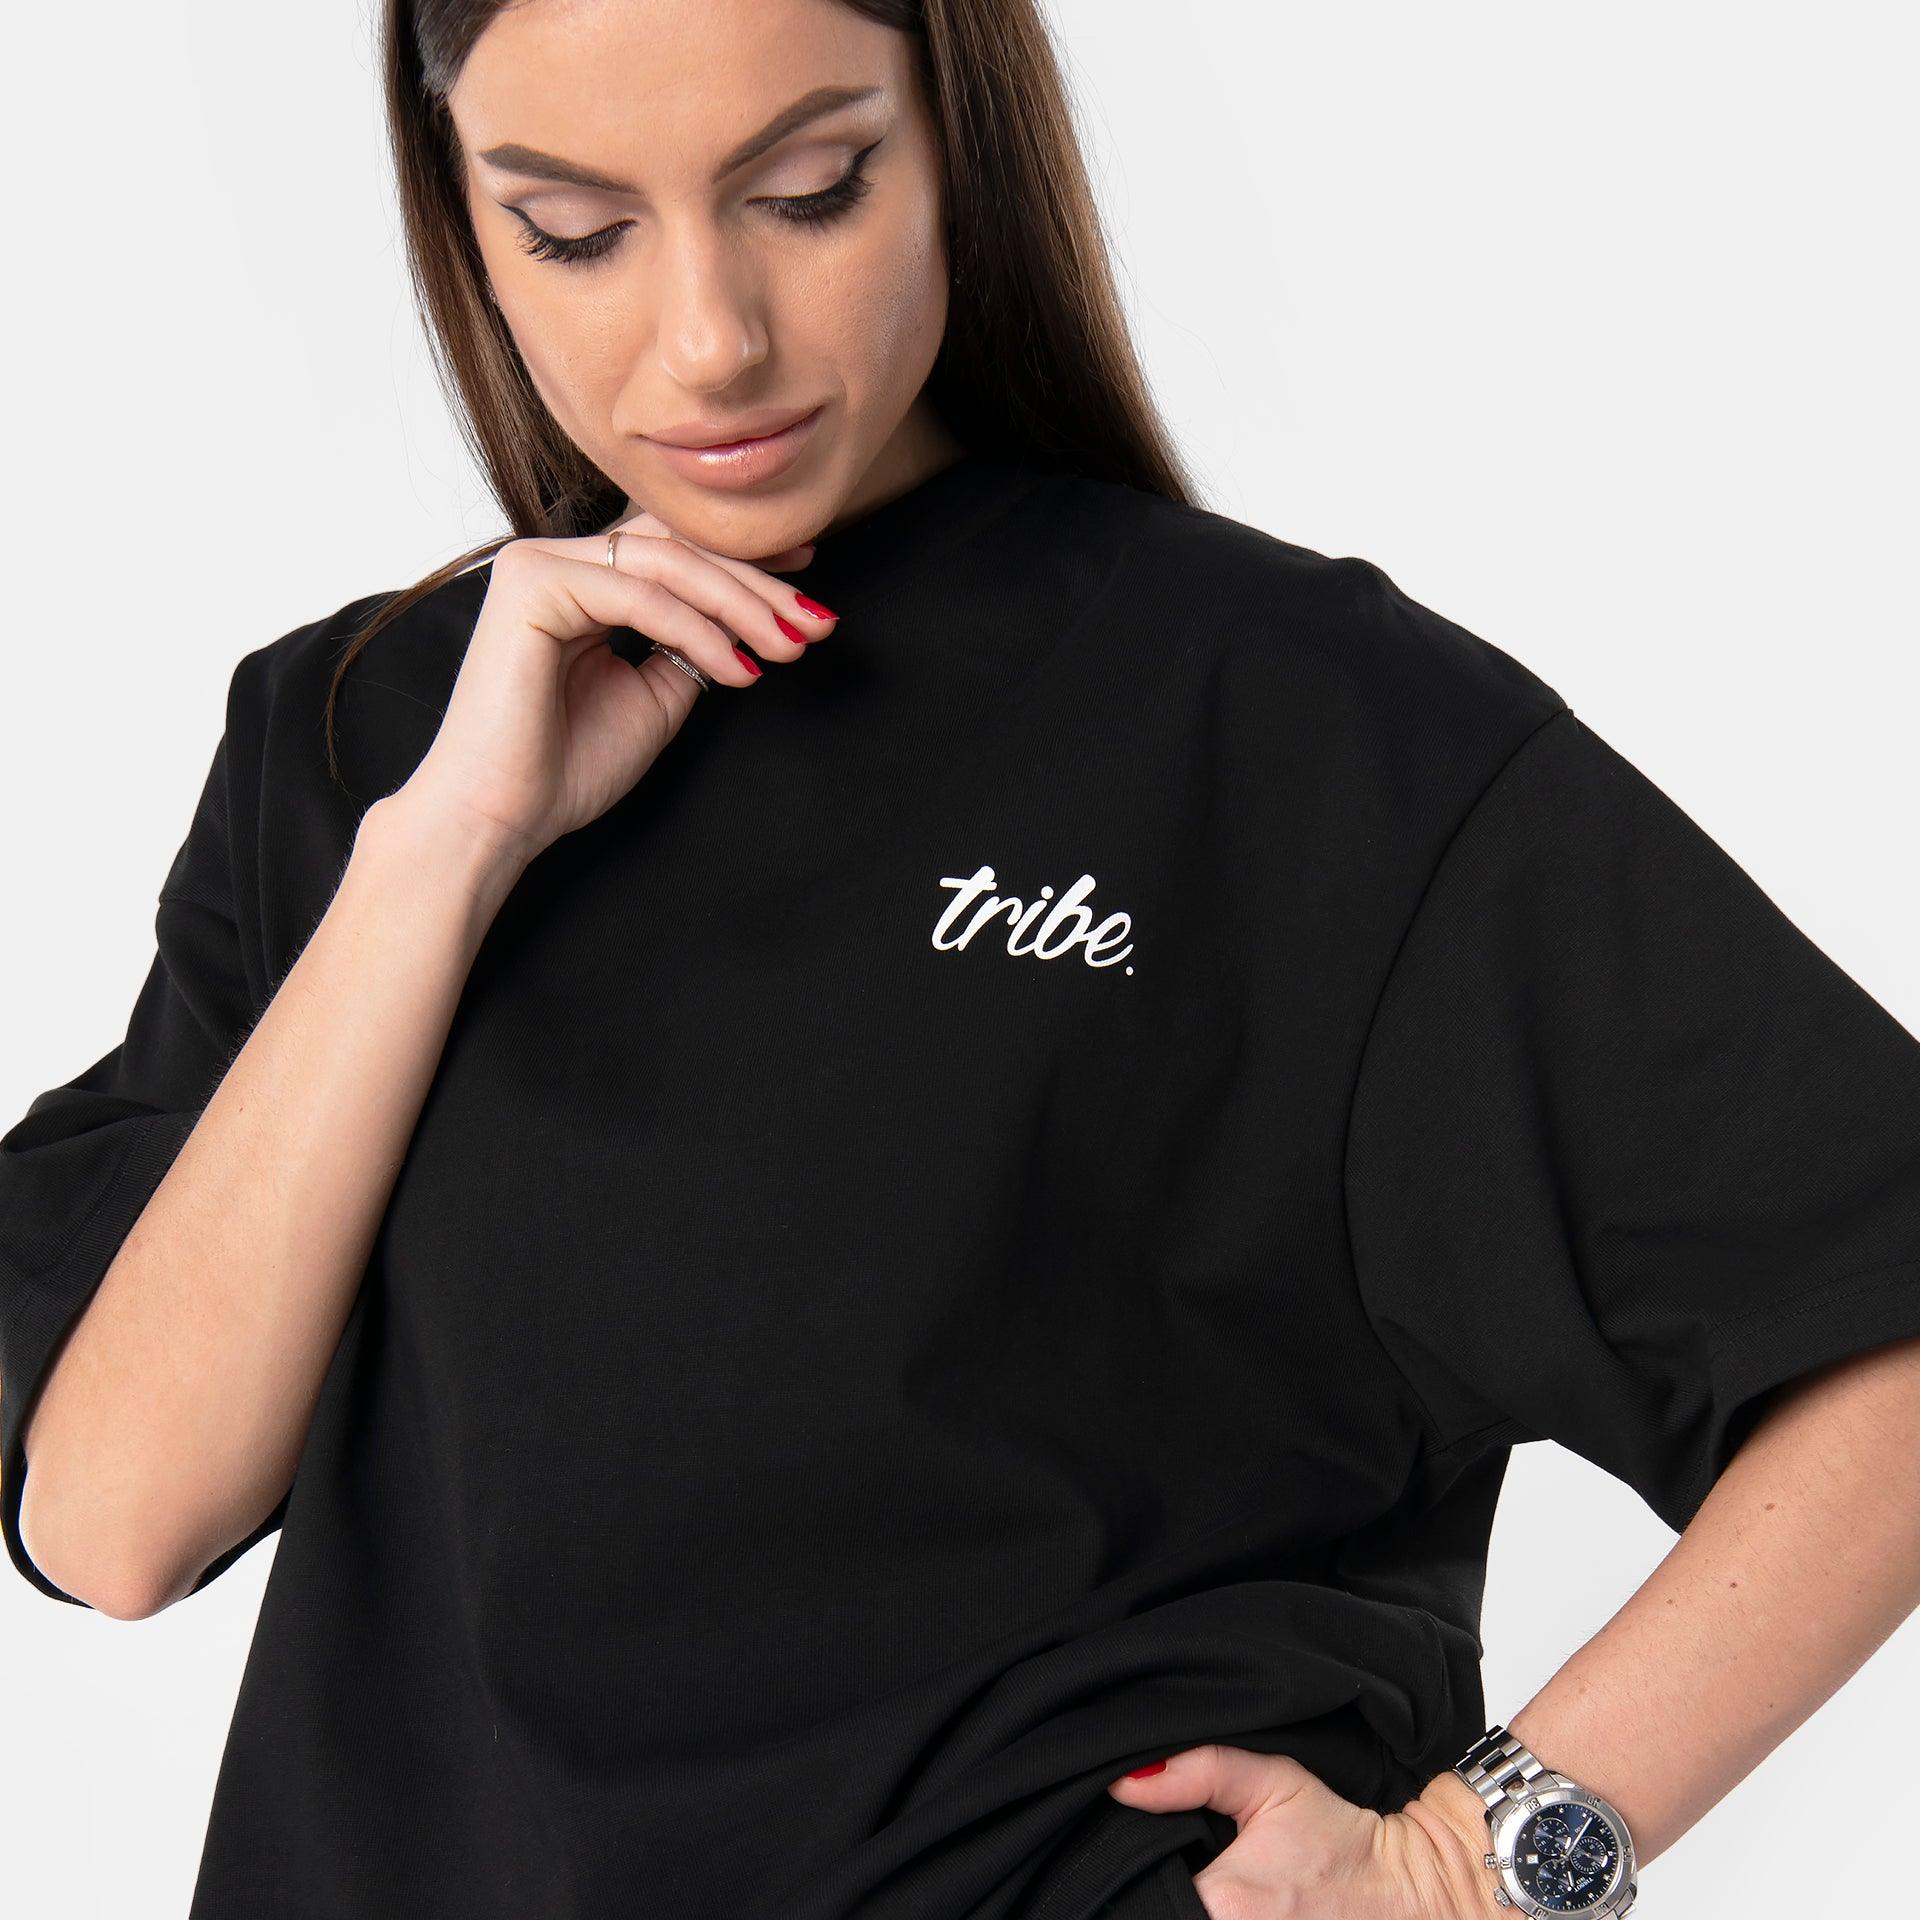 Black Parachute T-shirt From Tribe - WECRE8